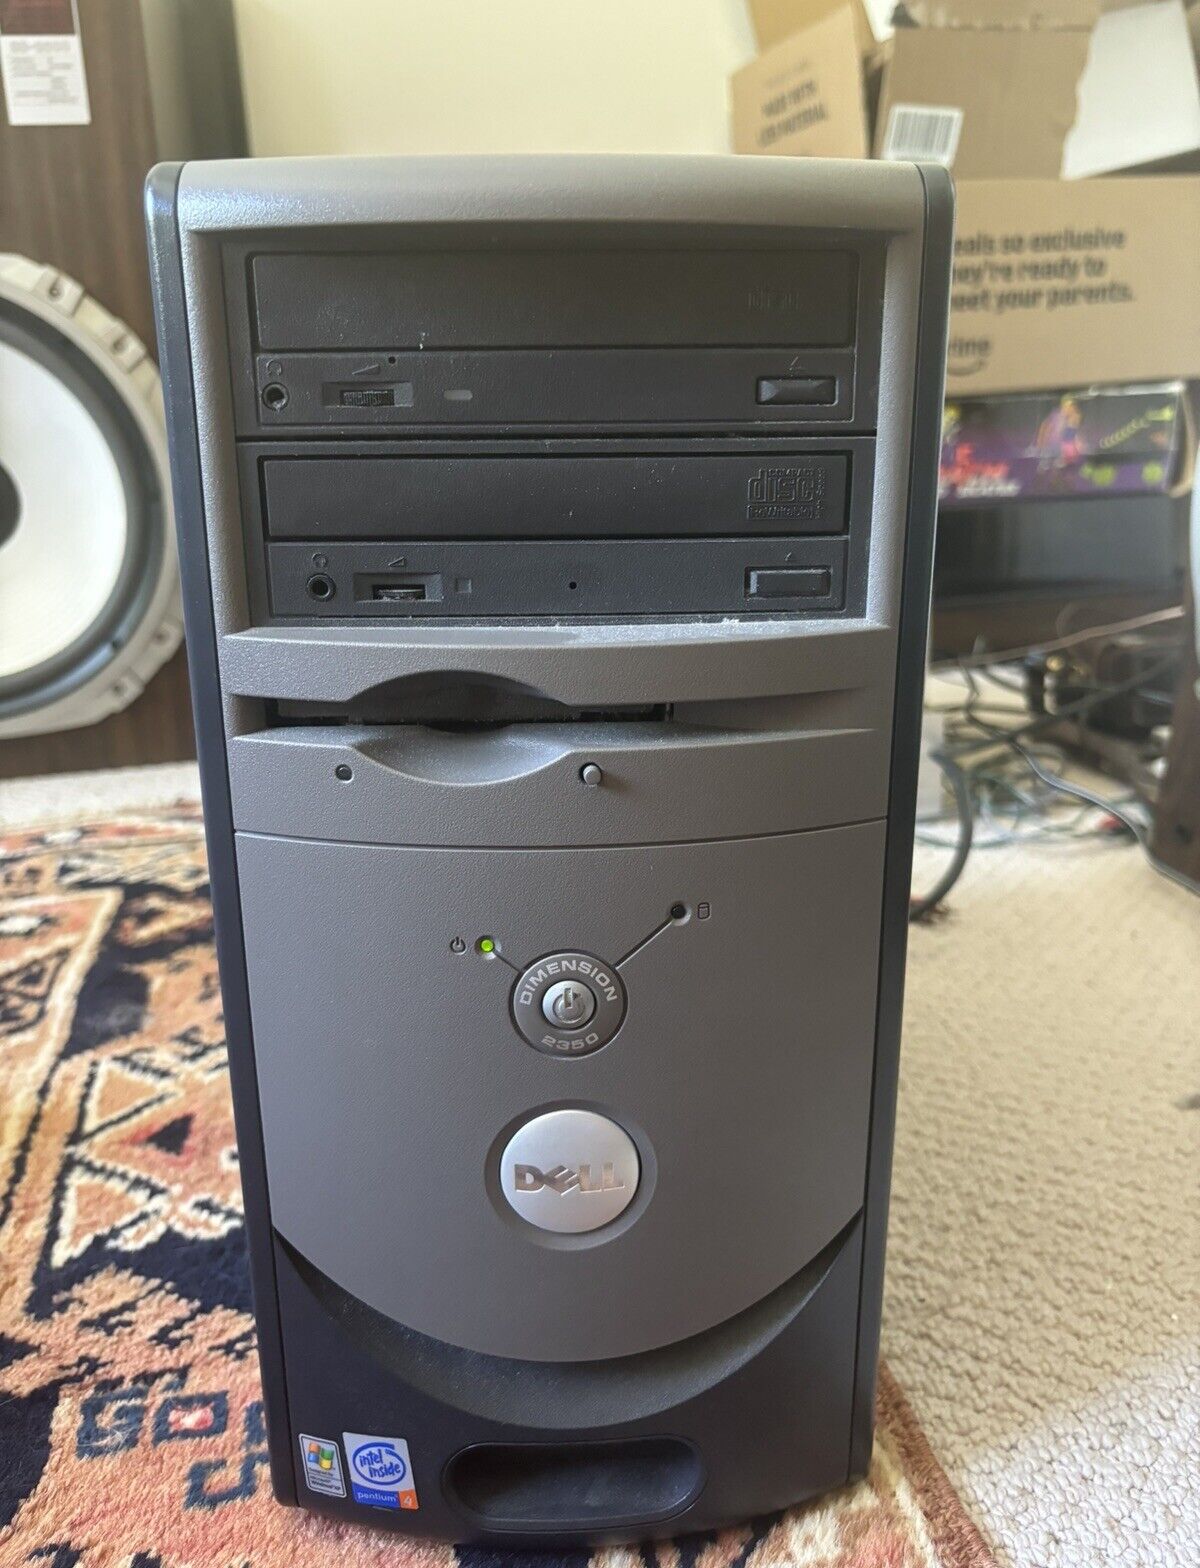 Dell Dimension 2350 1gb Ram 2 Cd OS HDD And Floppy Disk Drive READ DISCRIPTION